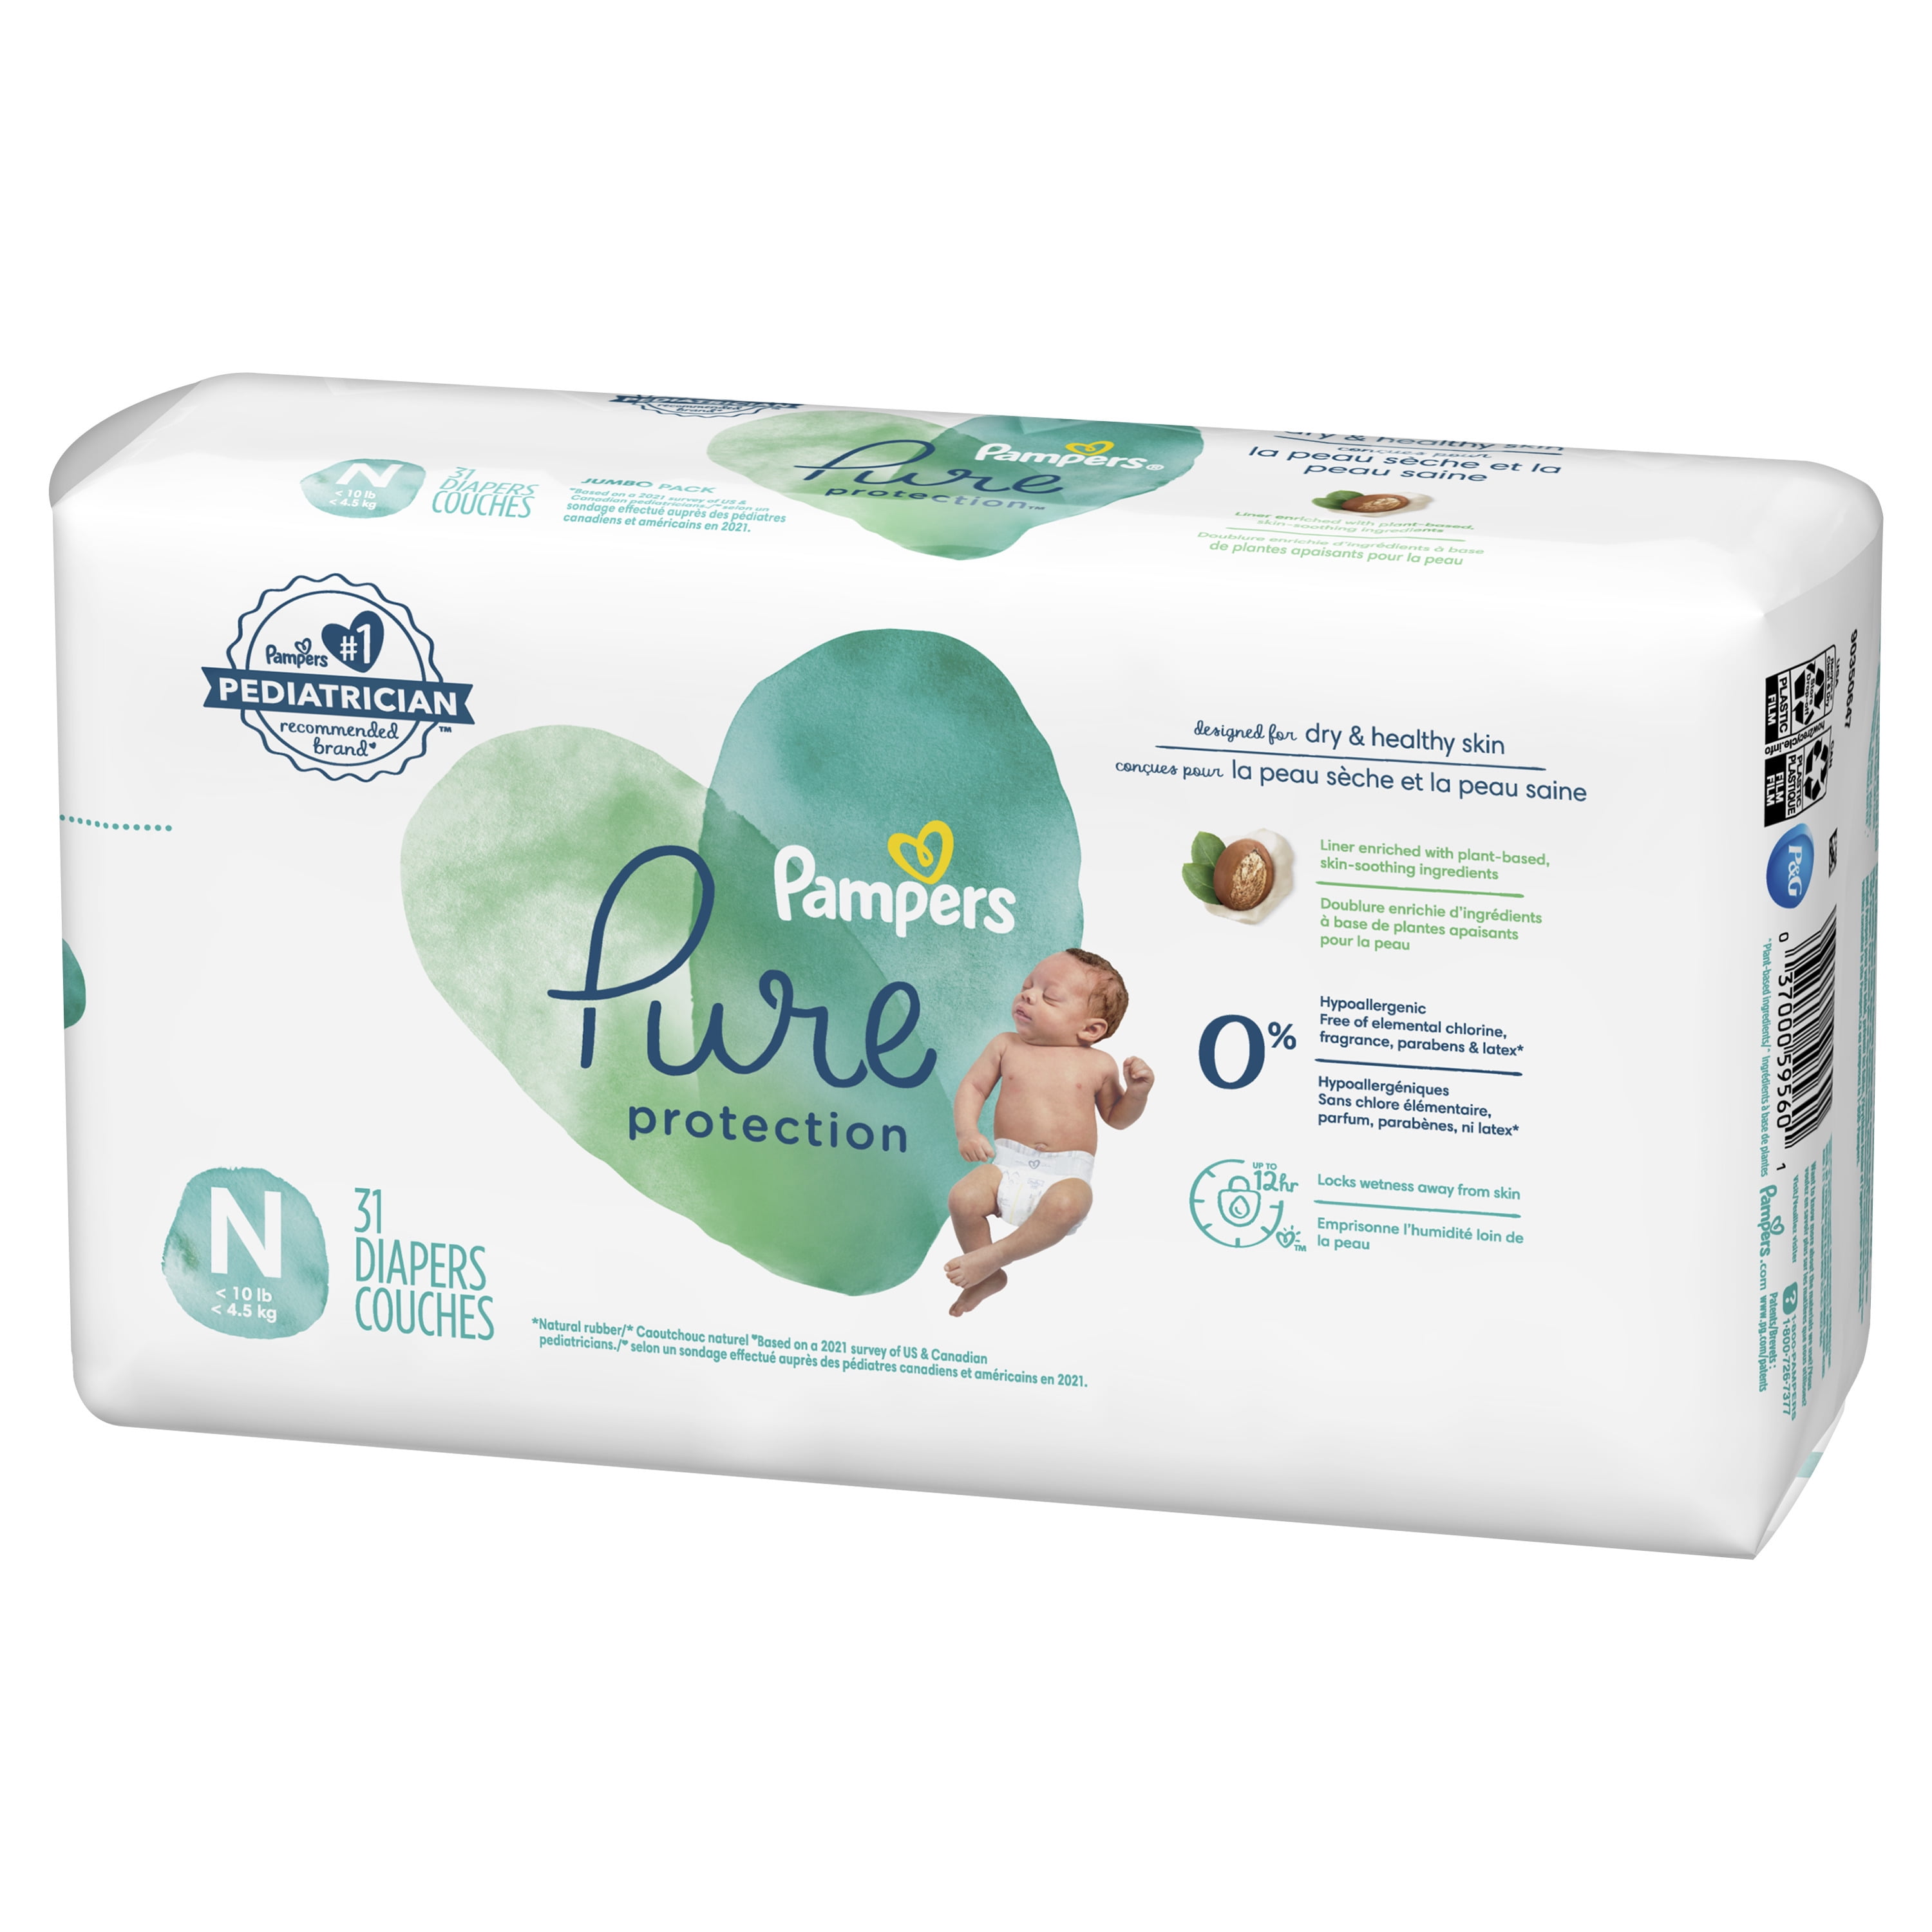 Pampers Pure Protection Newborn Diapers, 76 ct - Harris Teeter